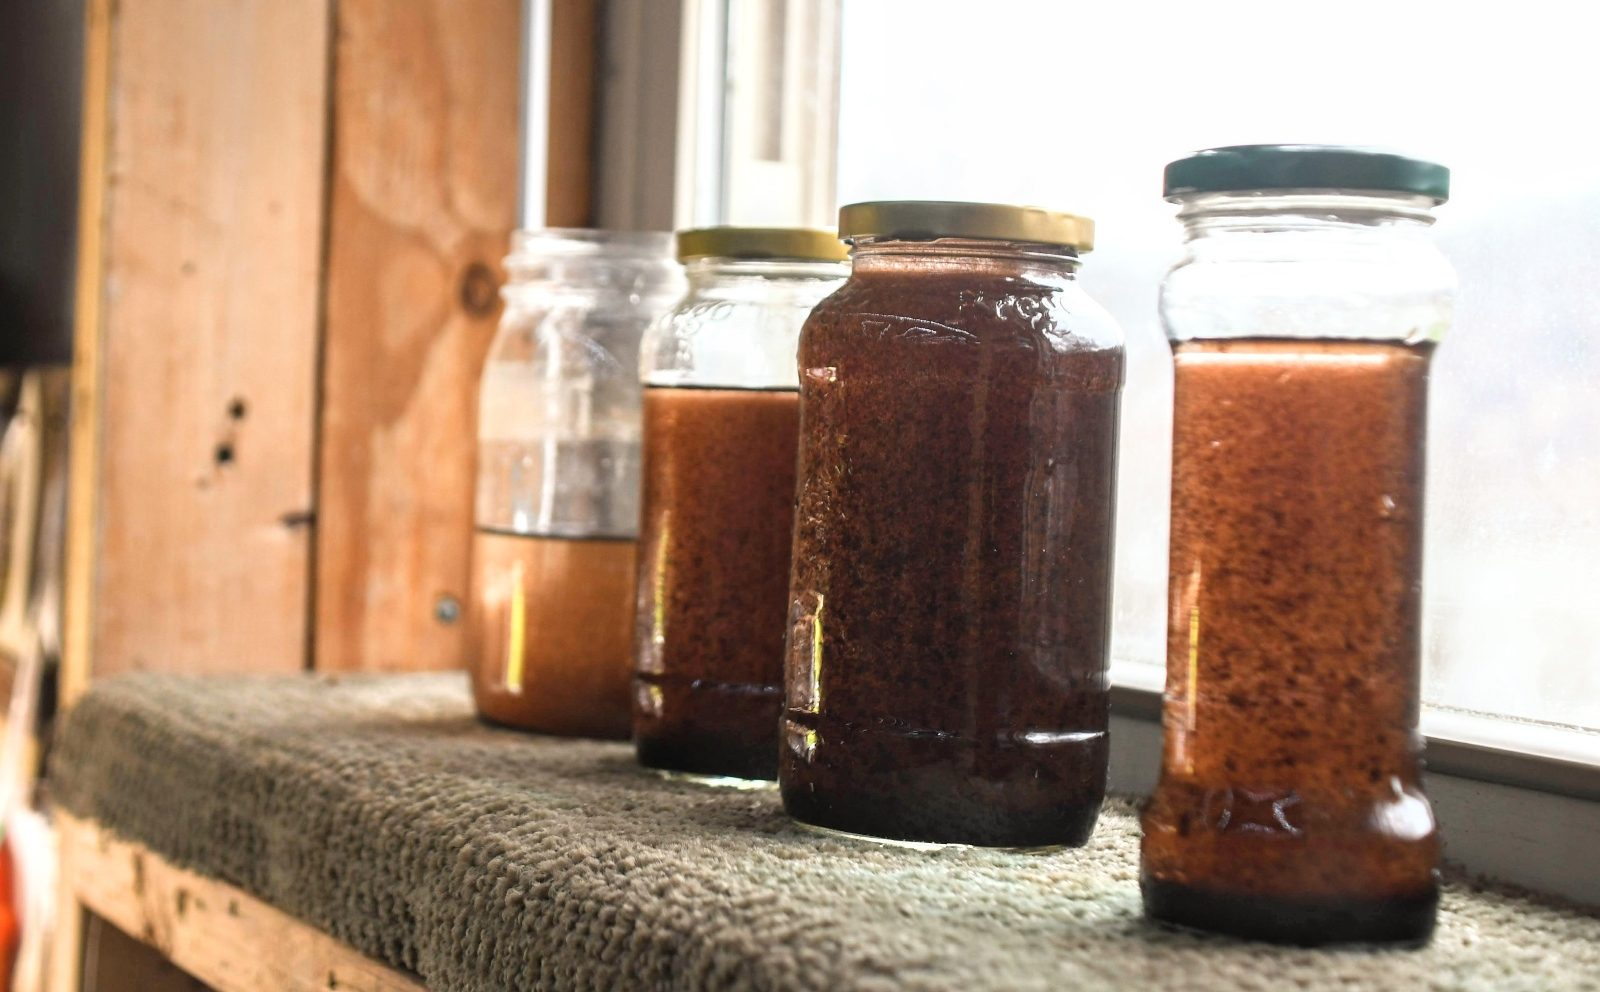 Four glass jars contain brown-colored water on a ledge.